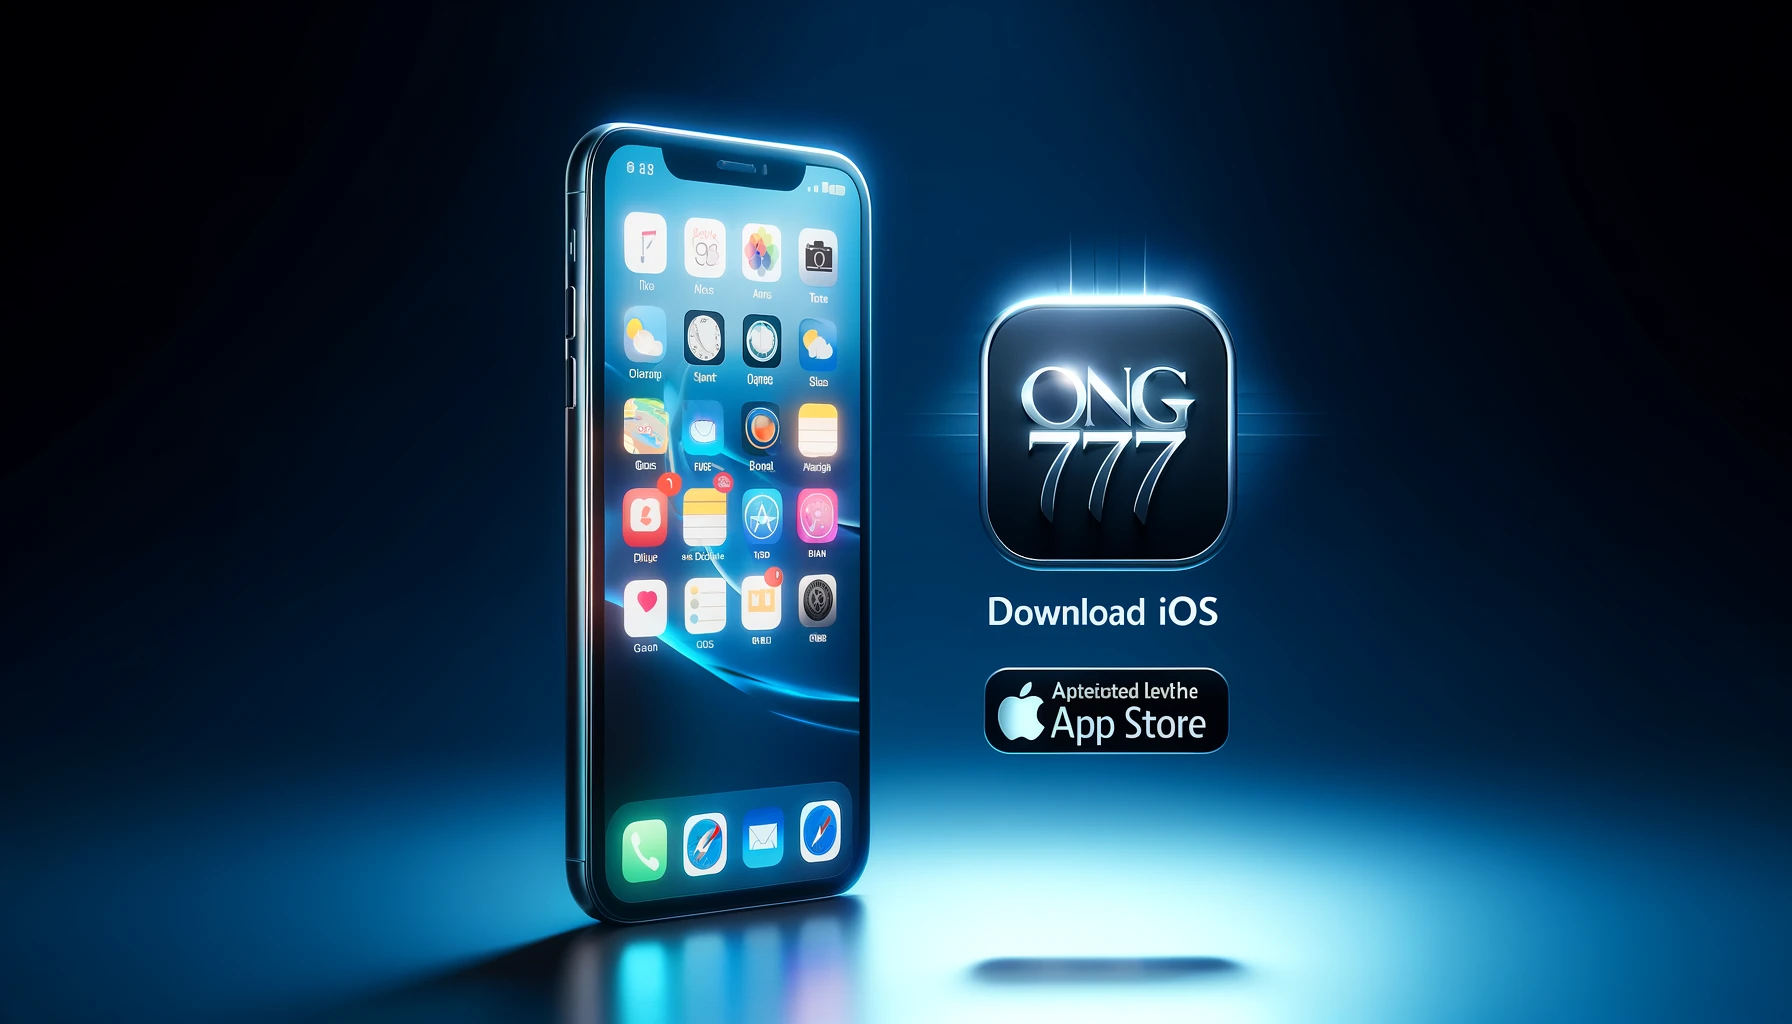 Ong777 Download iOS